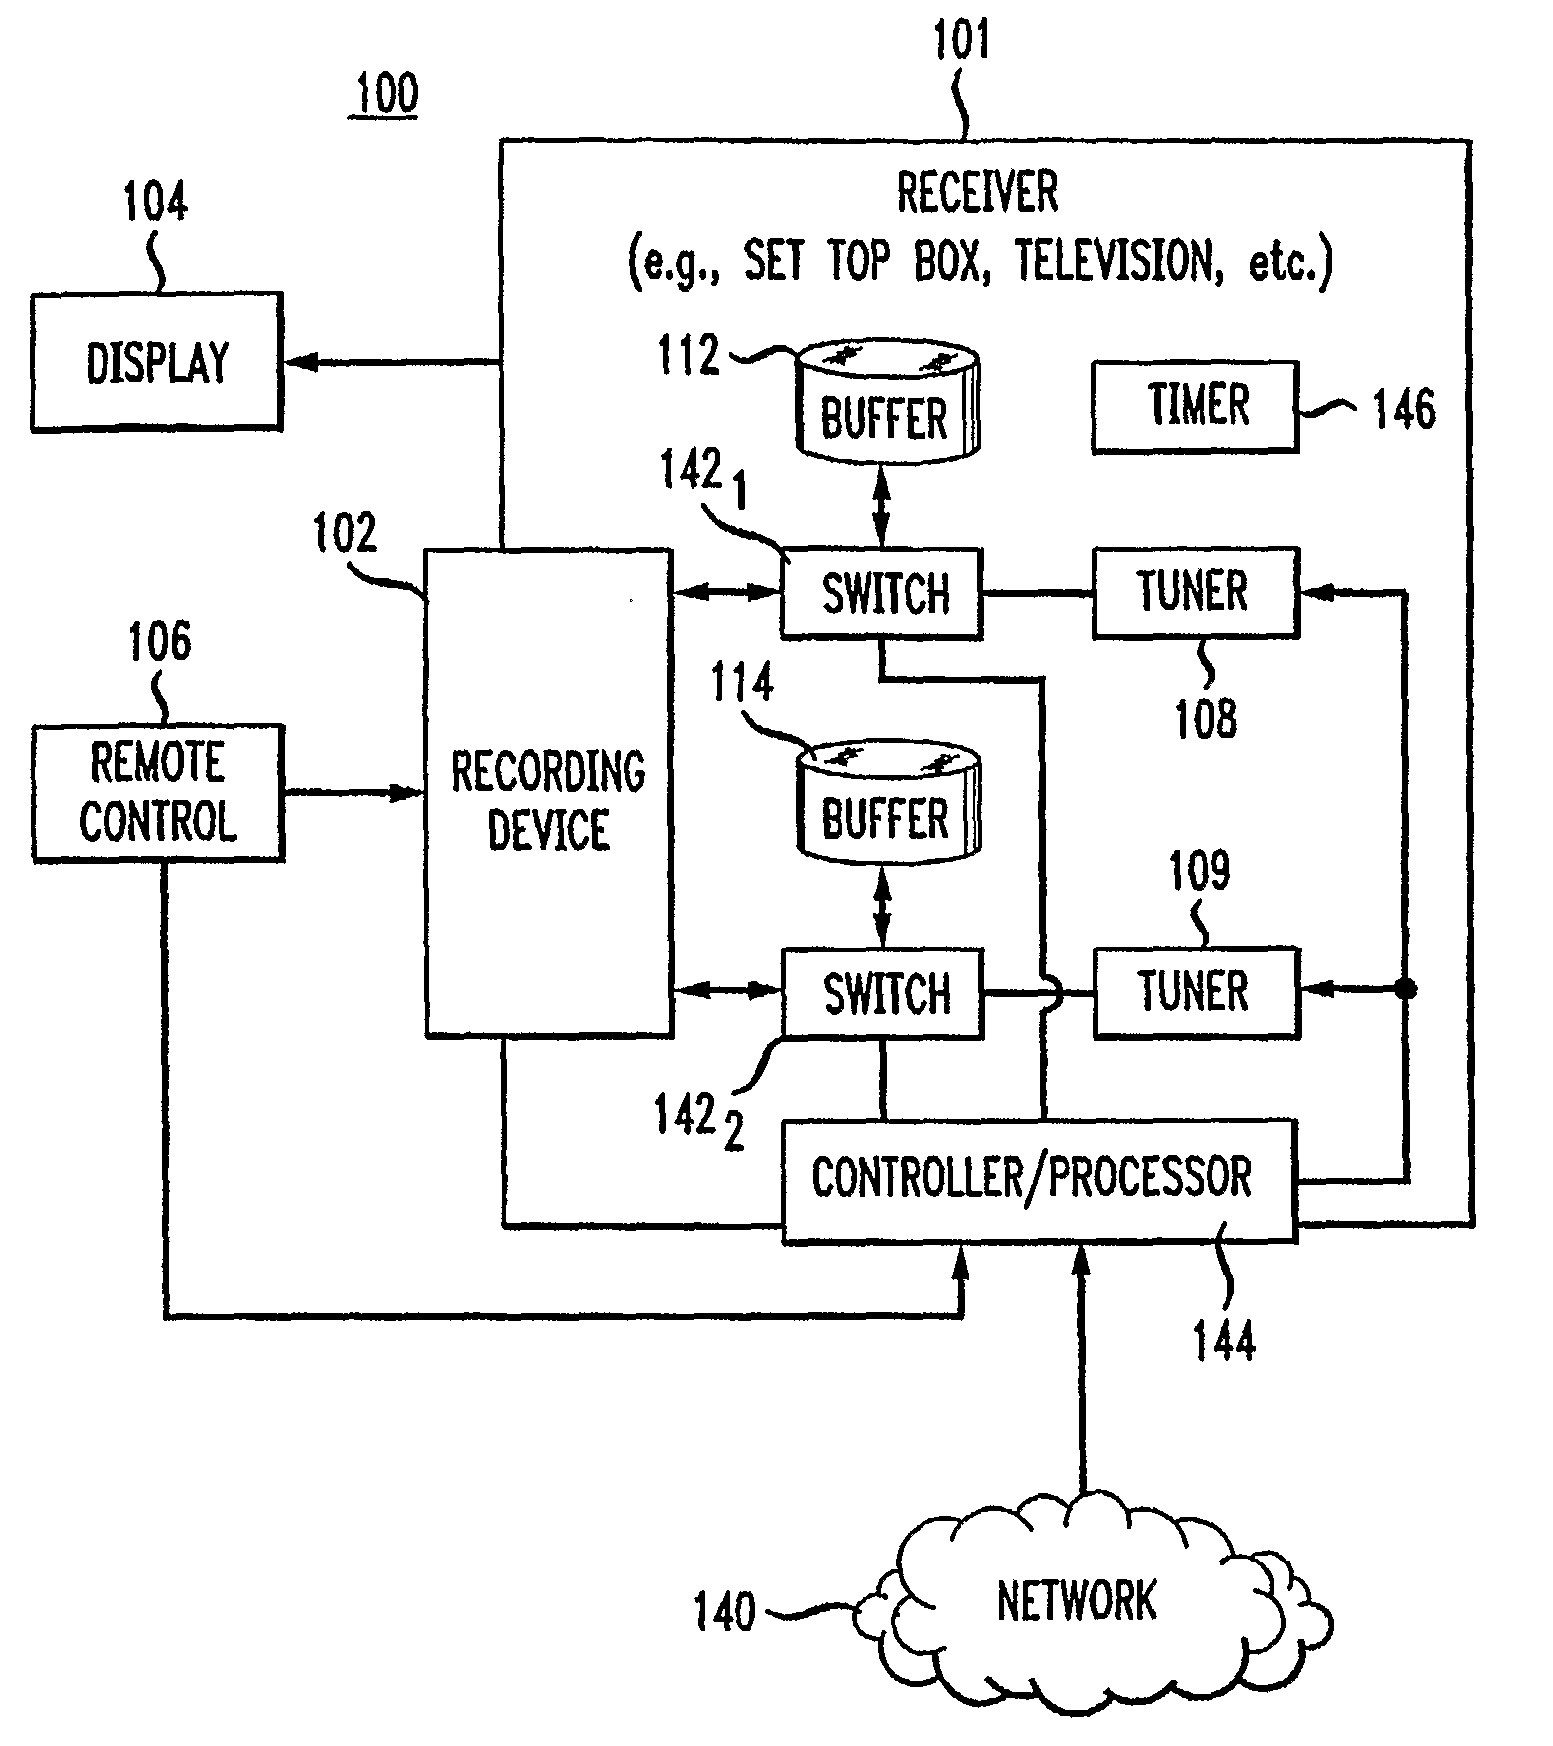 System, method and apparatus for enabling channel surfing while buffering and recording of preferred channels